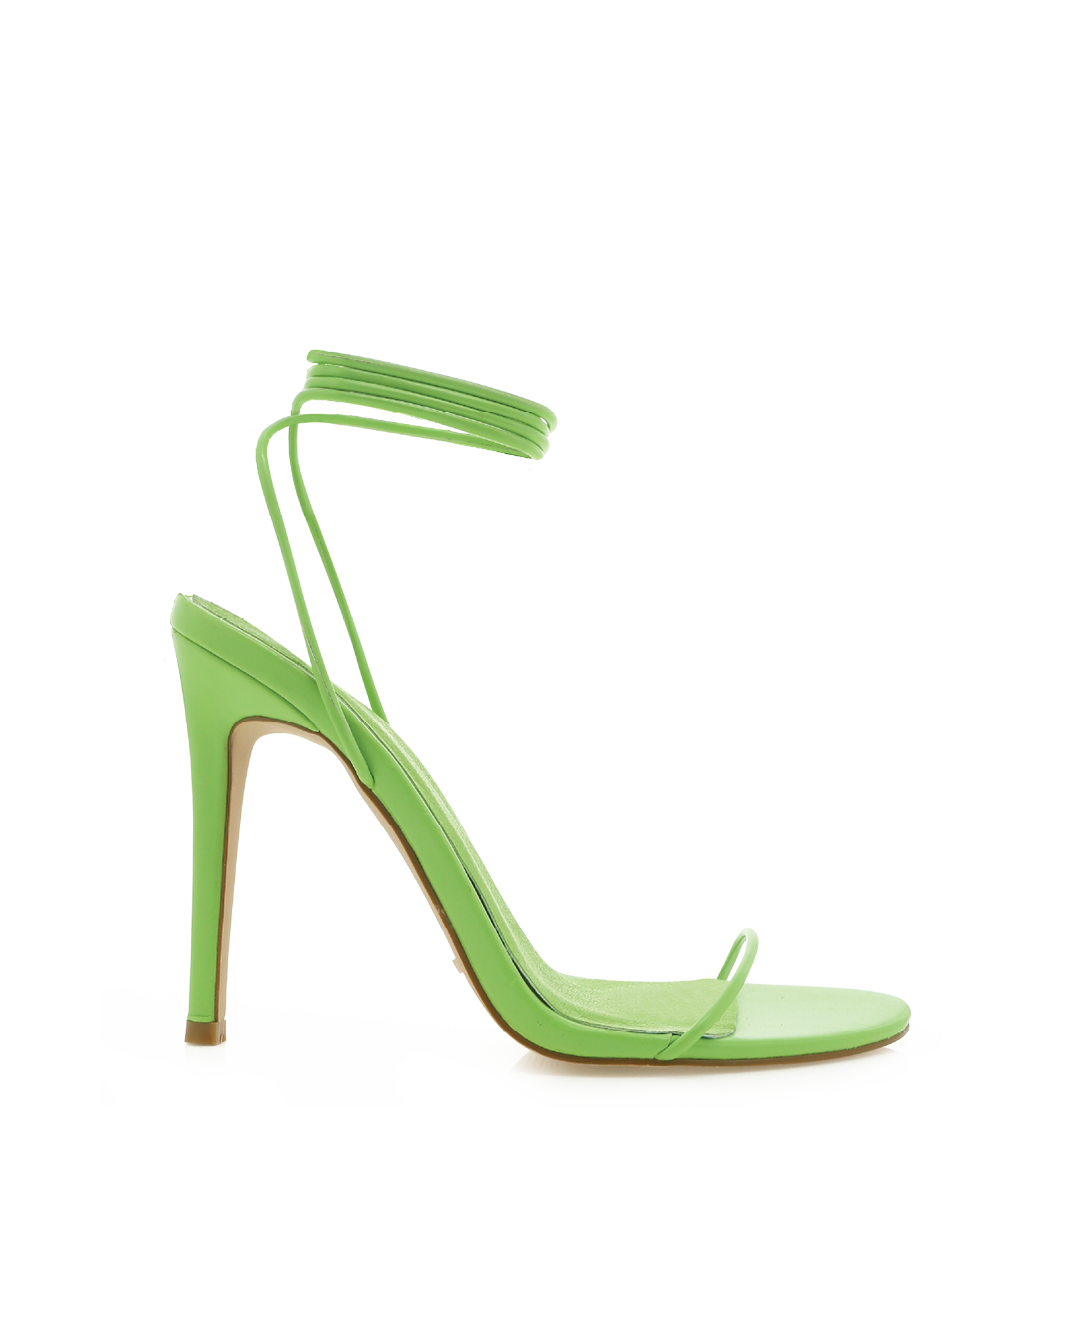 Women's Shoes, Sandals, Boots, Heels and More | Billini